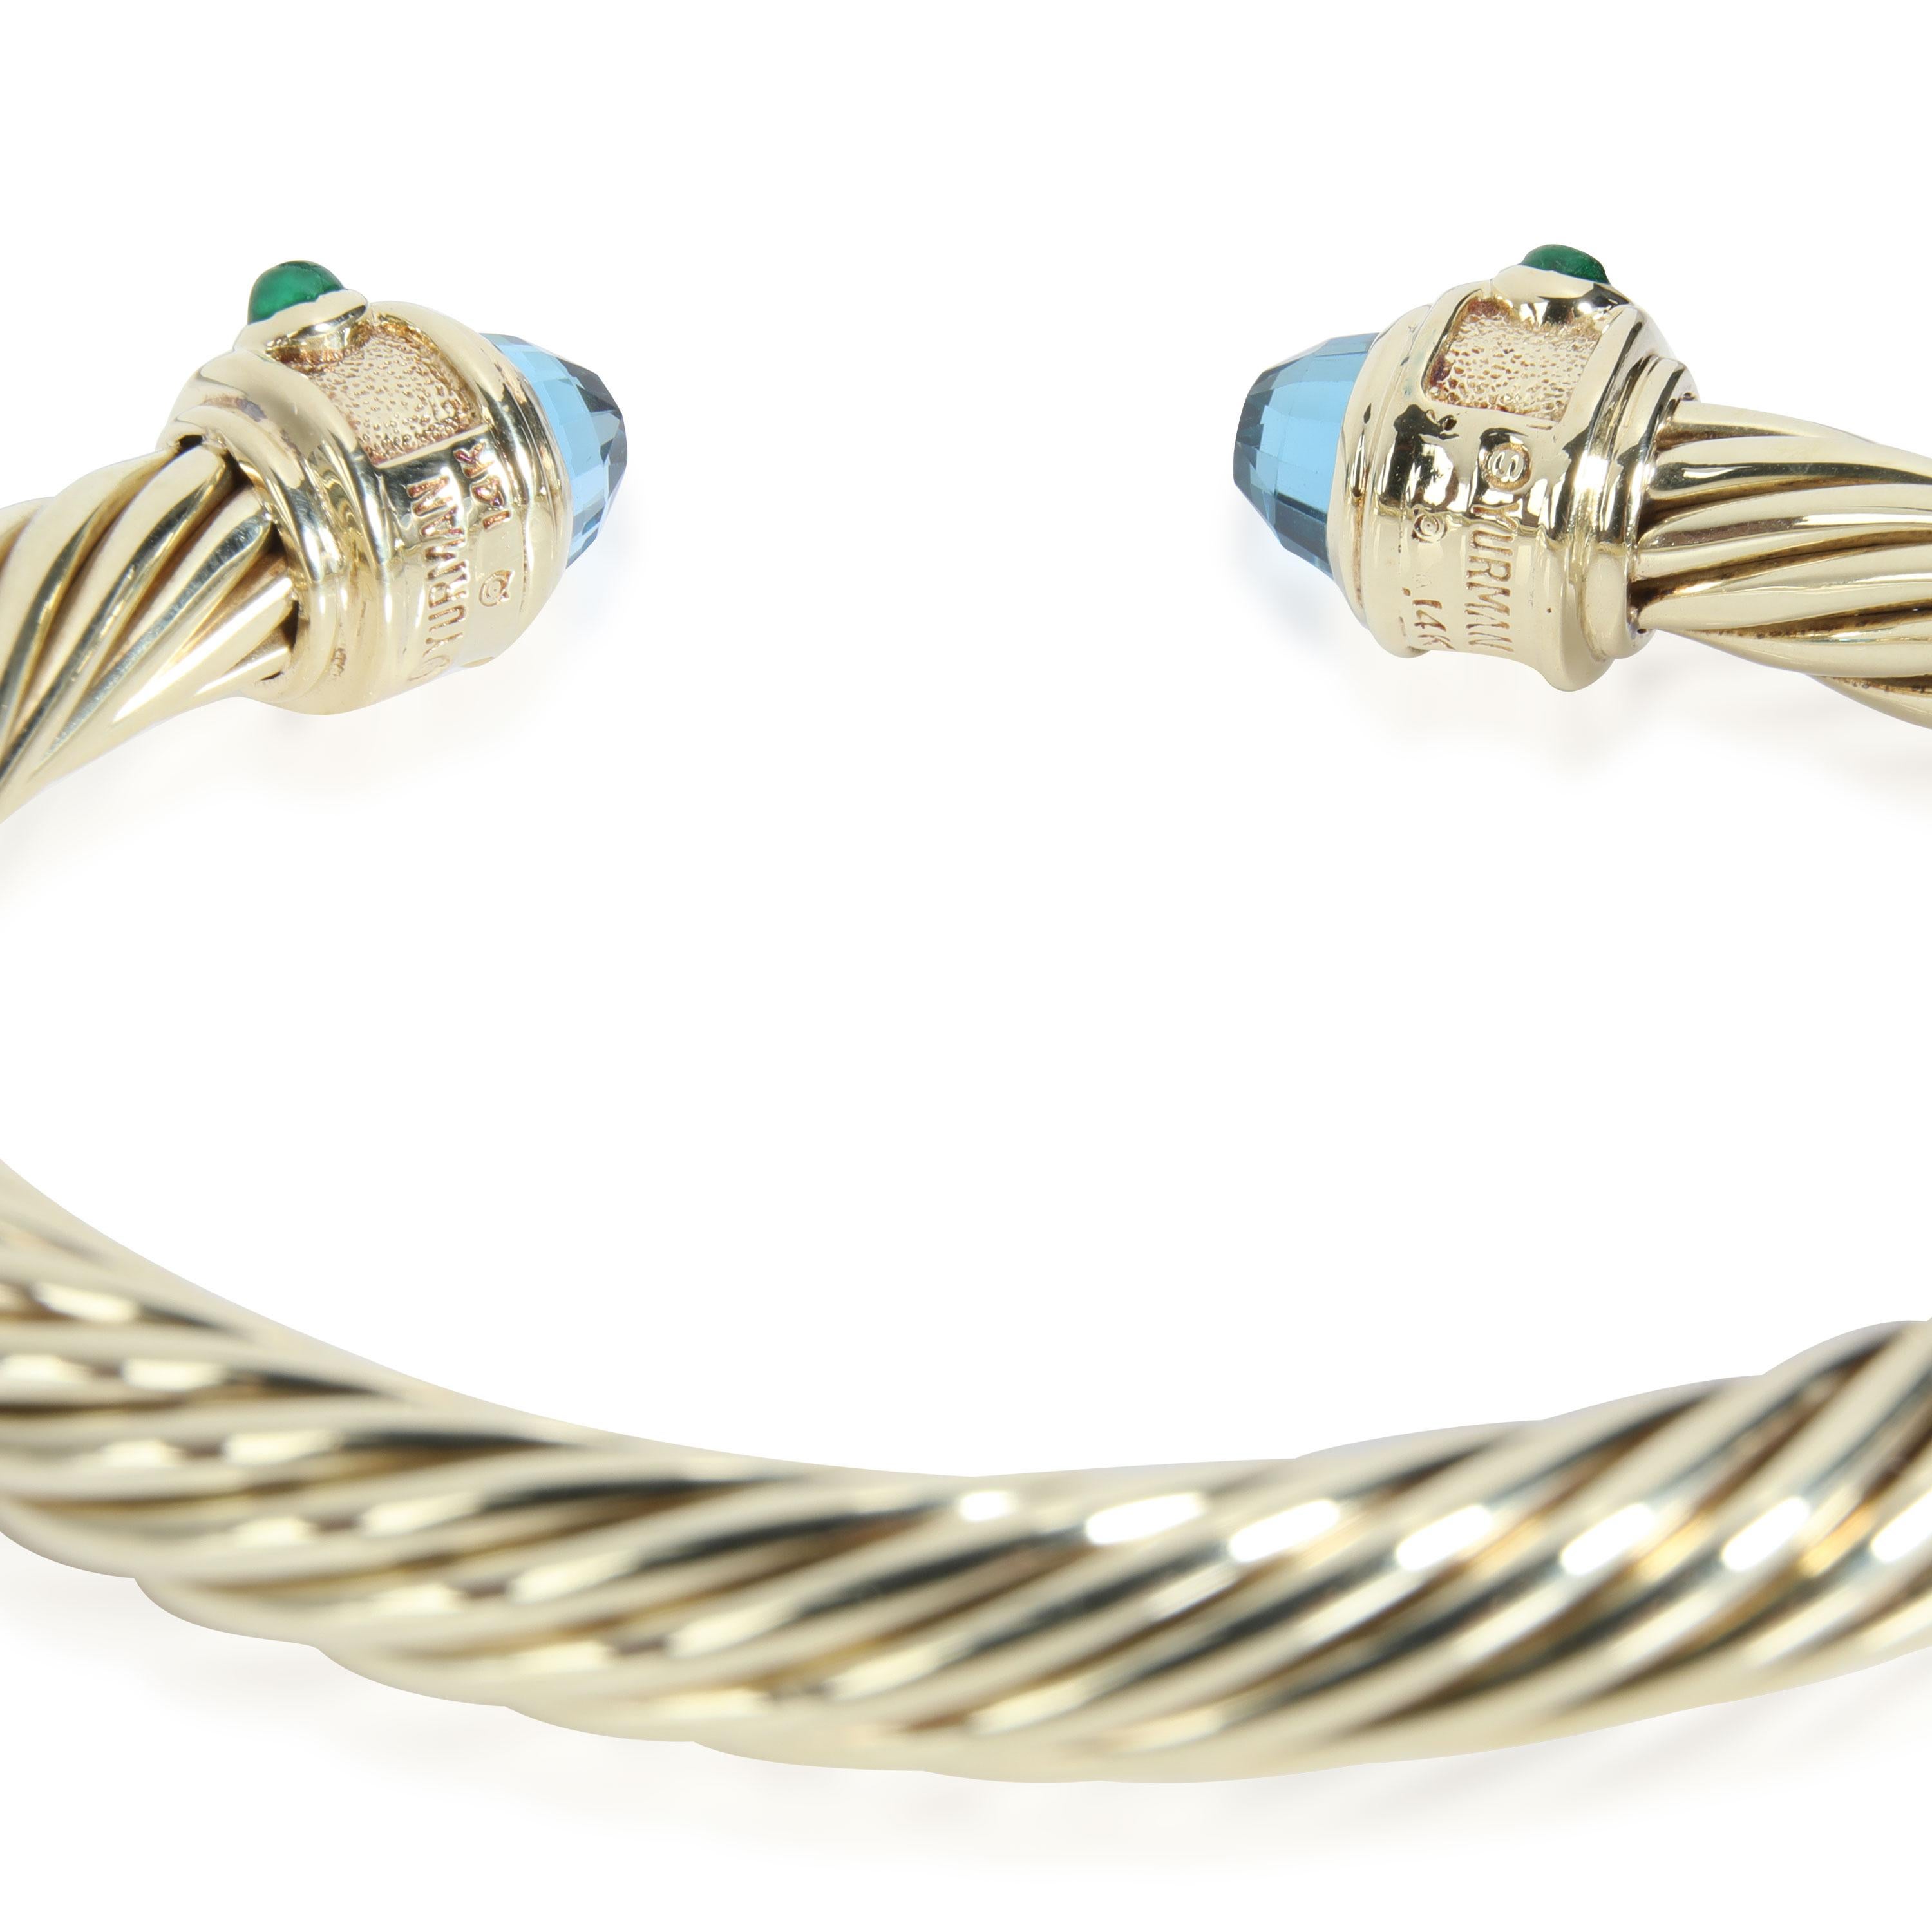 
David Yurman Renaissance Blue Topaz Bangle in 14K Yellow Gold

PRIMARY DETAILS
SKU: 111355
Listing Title: David Yurman Renaissance Blue Topaz Bangle in 14K Yellow Gold
Condition Description: Retails for 7,200 USD. In excellent condition and